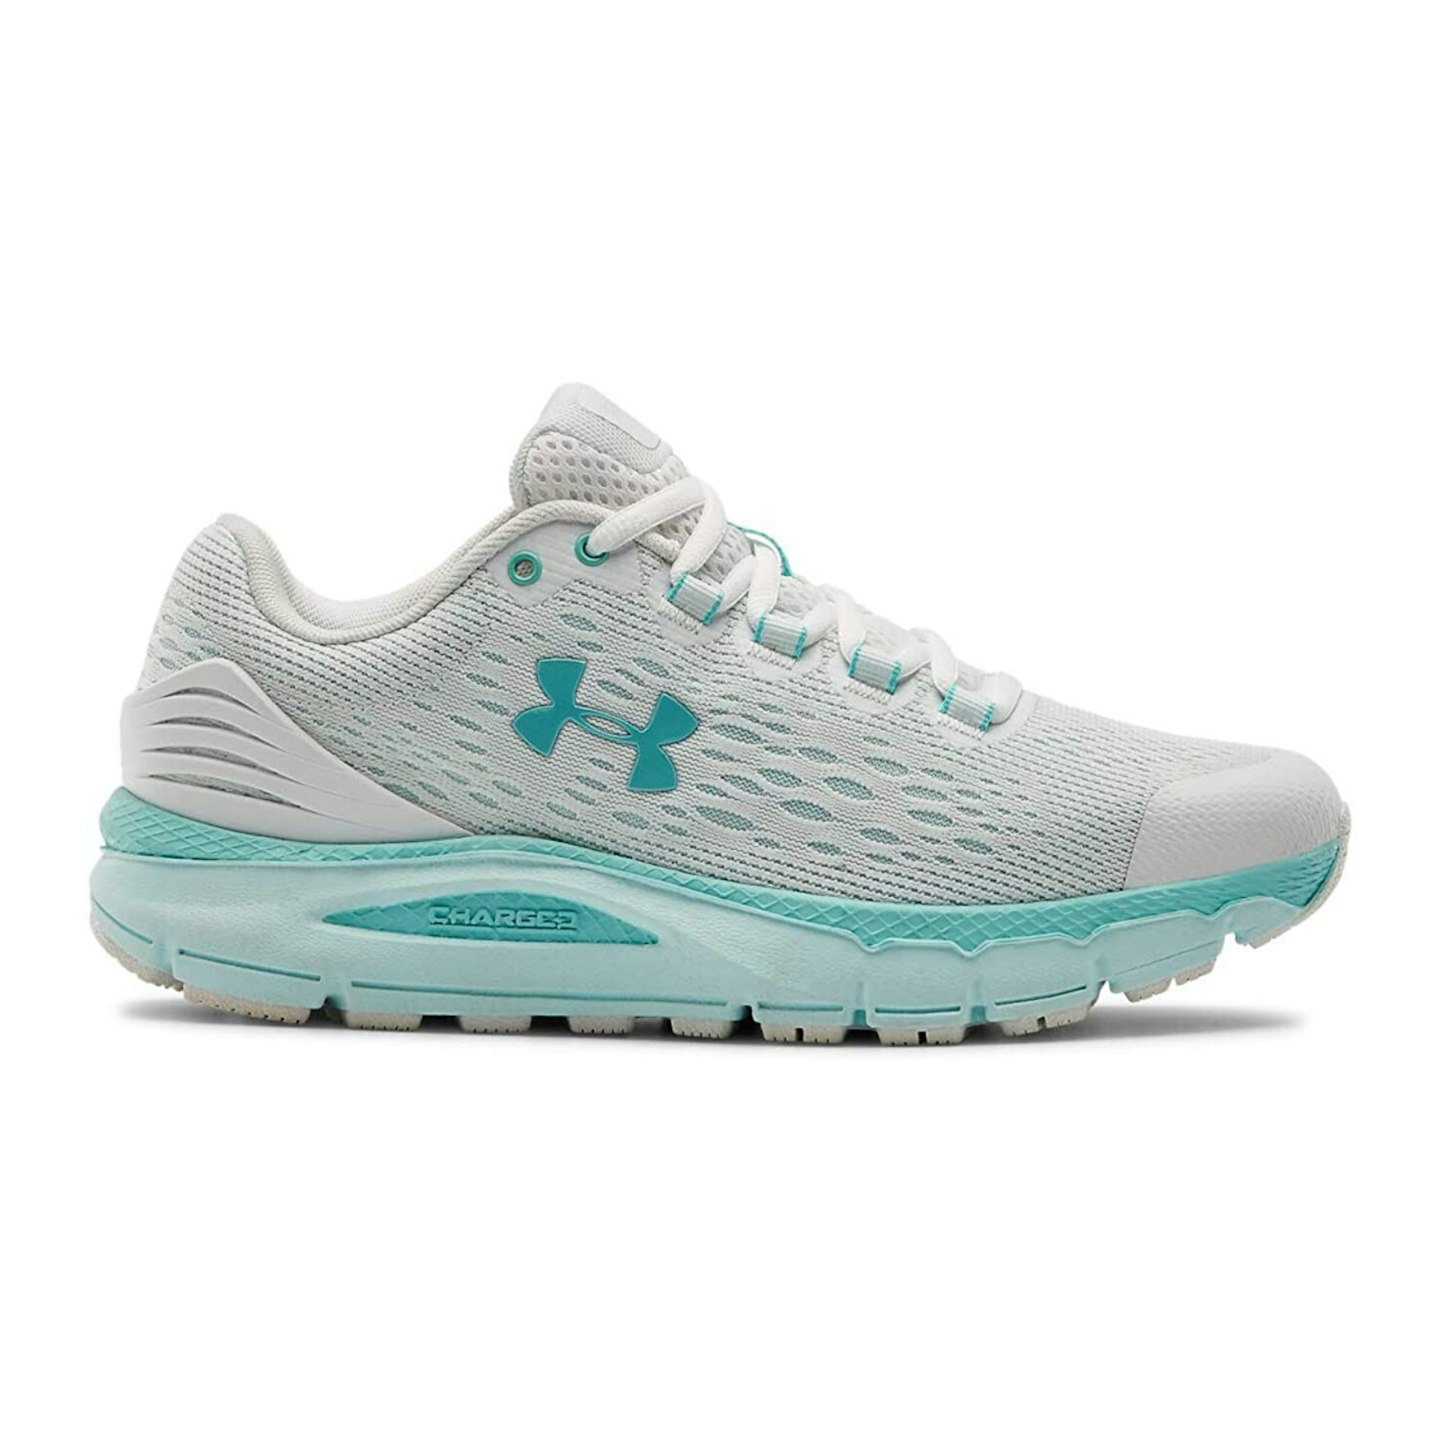 Under Armour Women's Charged Intake 4 Running Shoes